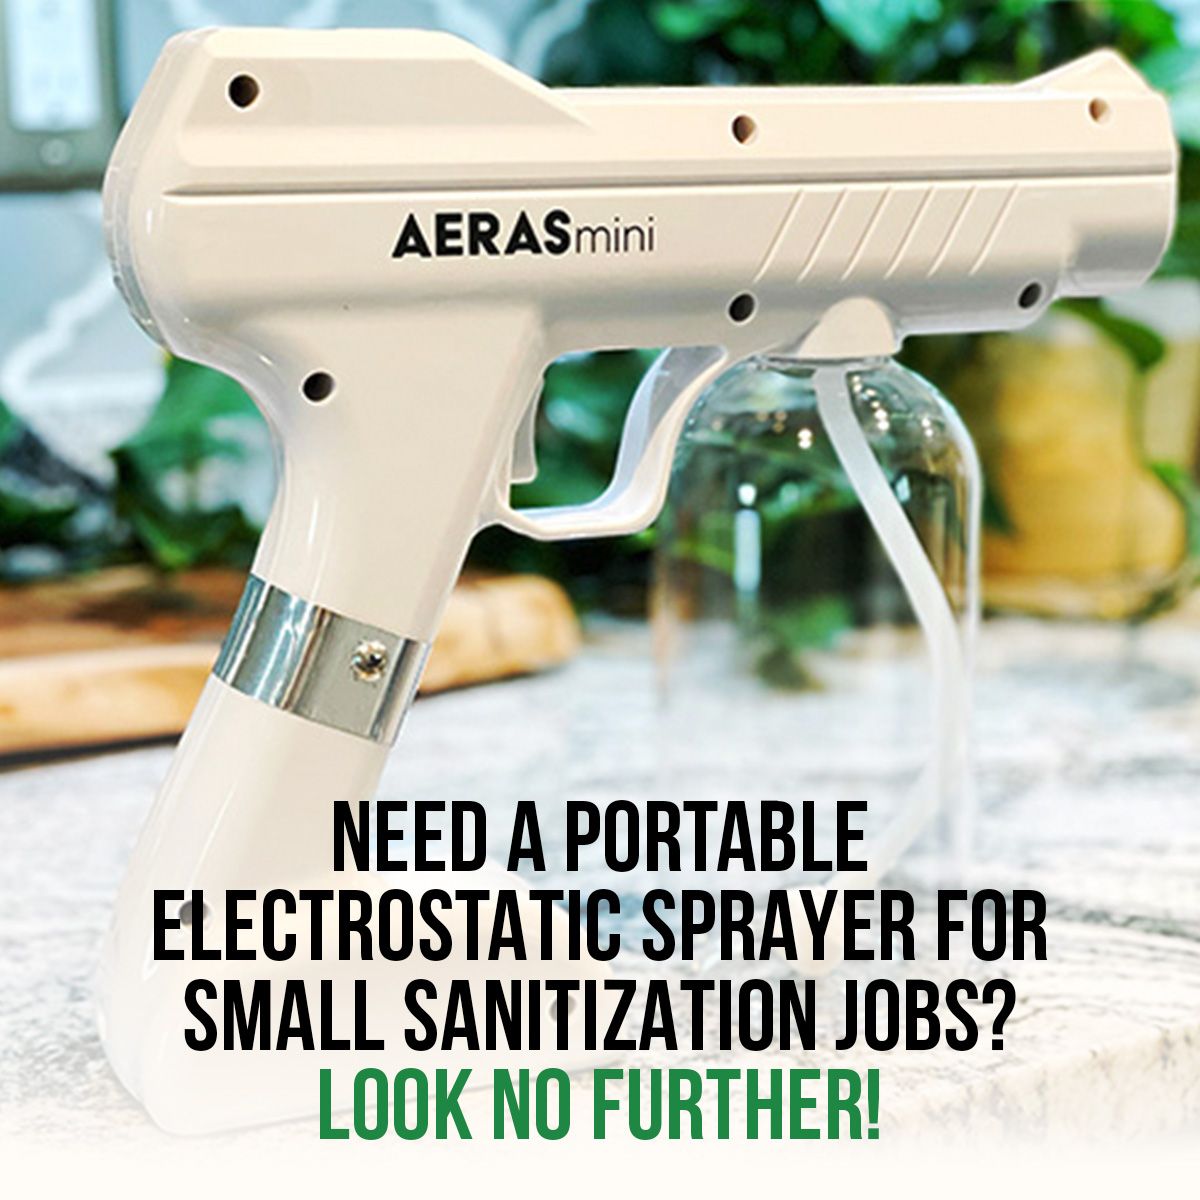 Need a Portable Electrostatic Sprayer for Small Sanitization Jobs? Look No Further